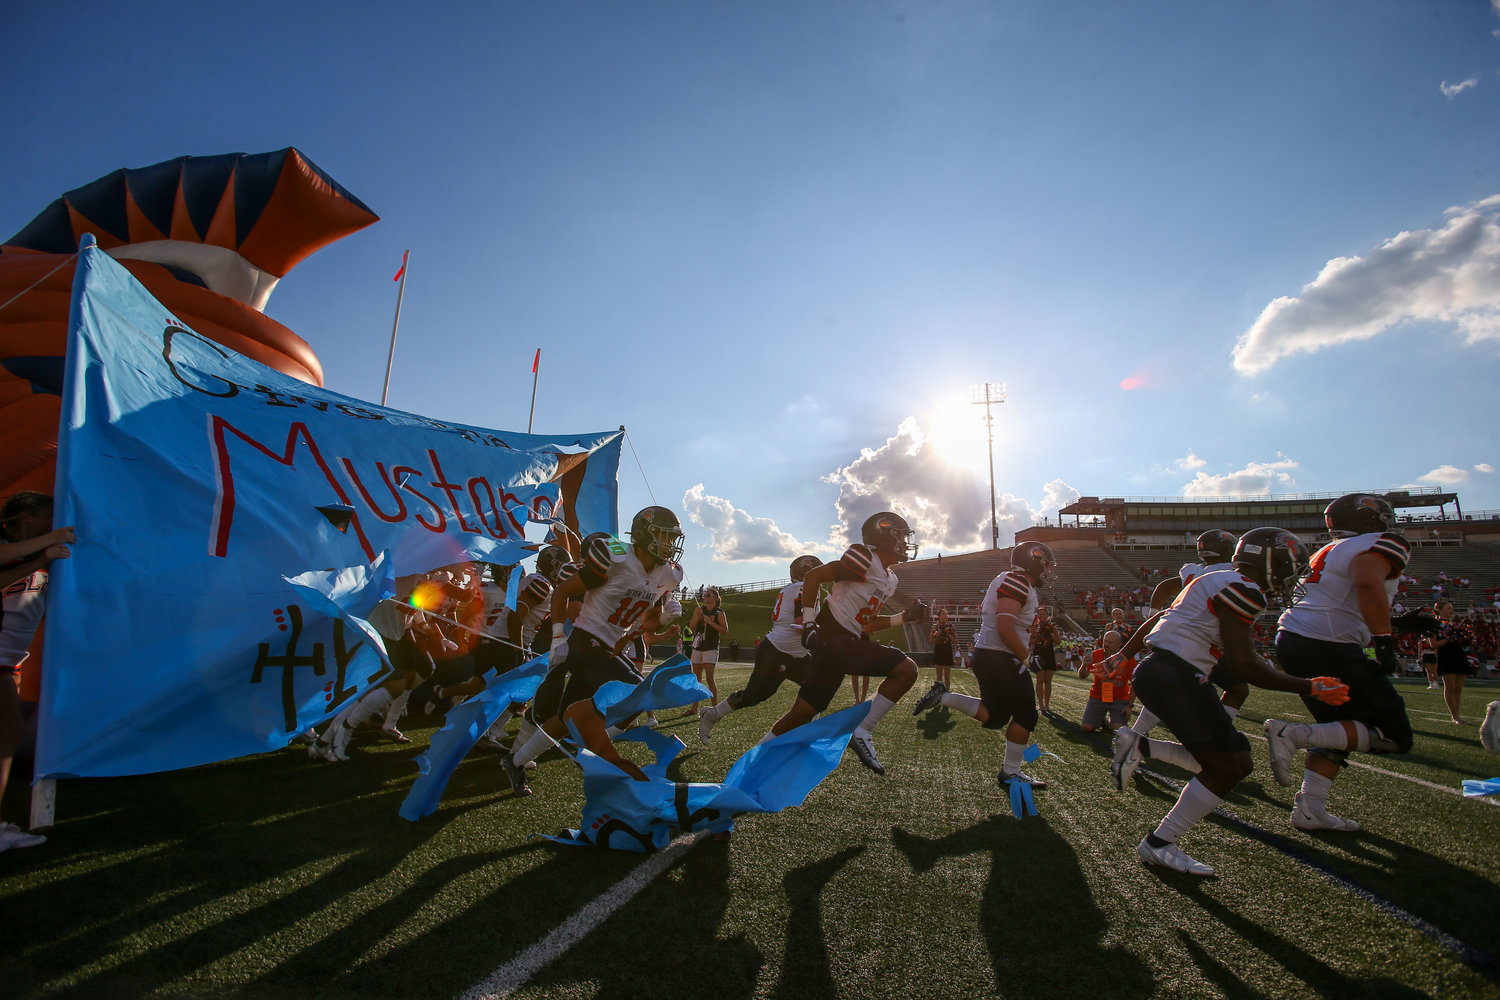 The Seven Lakes Spartans football team takes the field before the start of game between the Seven Lakes Spartans and Memorial Mustangs on August 25, 2022 in Houston, Texas. Photo Credit: John Glaser - Katy Times